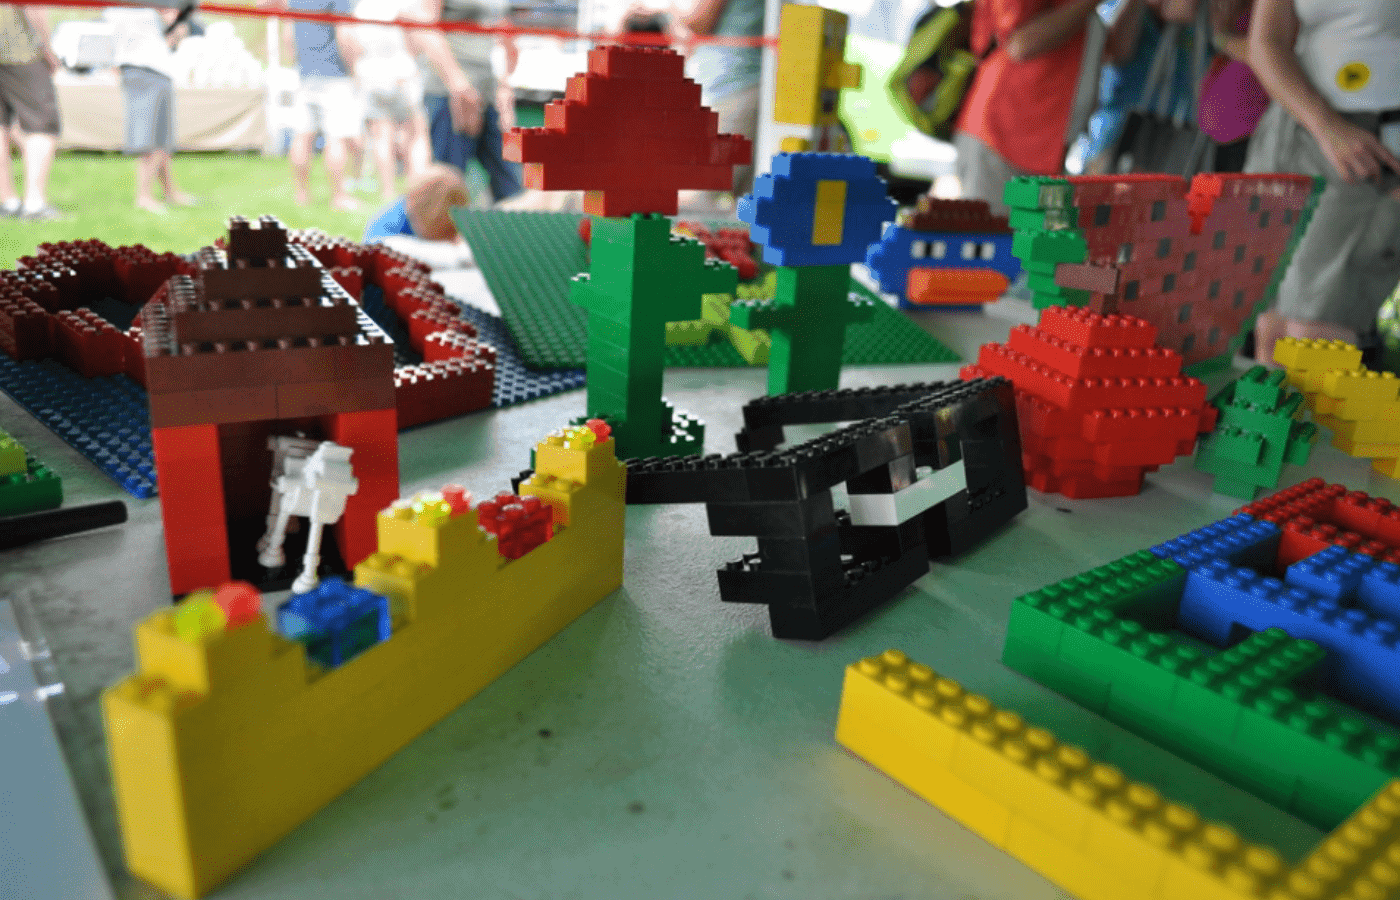 What Age Should You Stop Playing With LEGOS